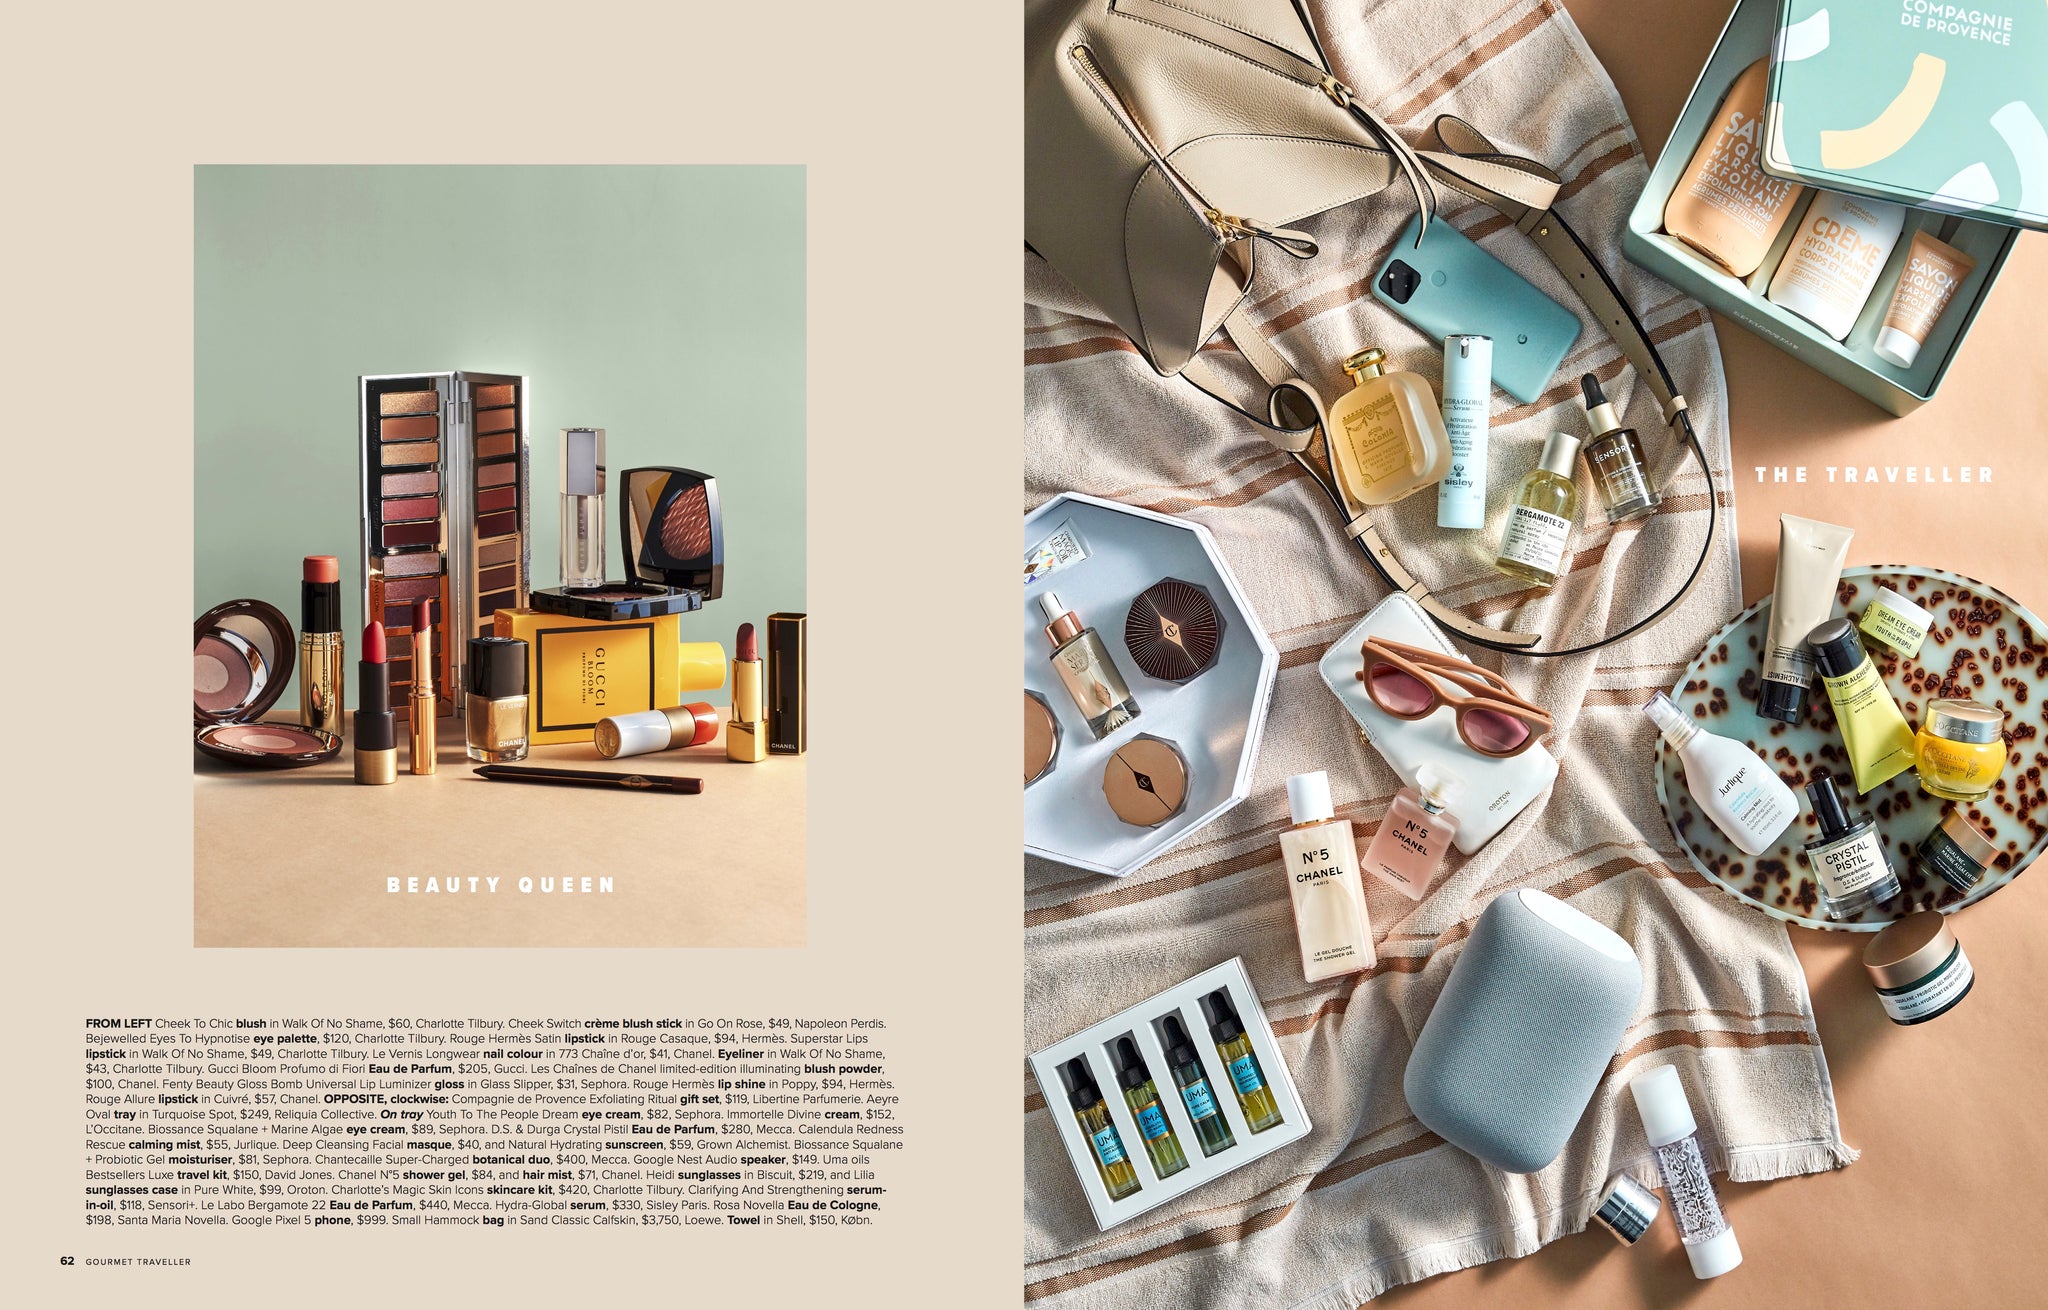 Grecian Purveyor and Gourmet Traveller magazine Australia for their official Christmas 2020 gift guide for food lovers.